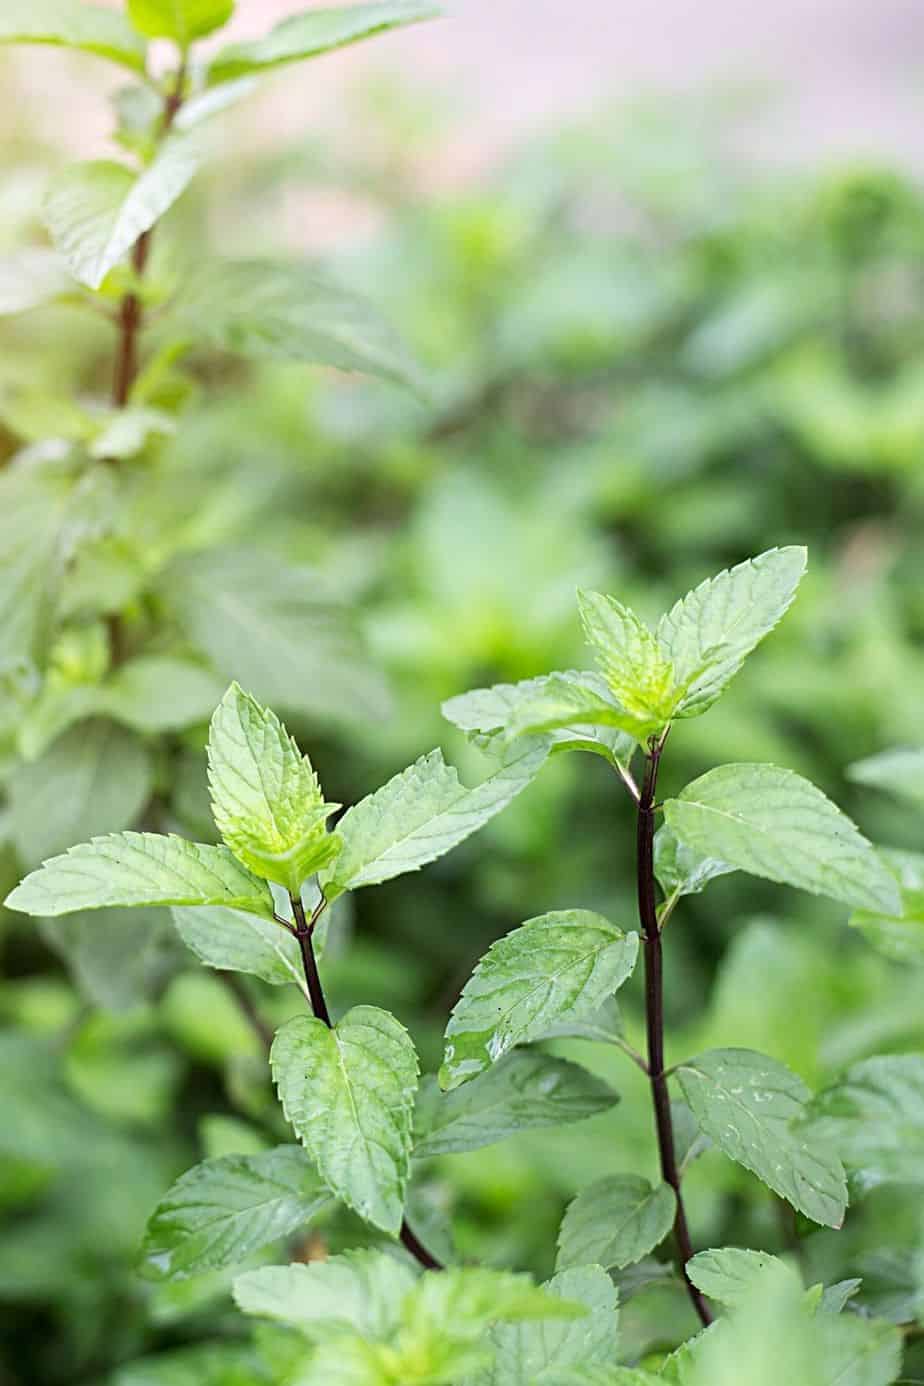 Mint is another herb that you can grow in shady areas like the north-facing balcony